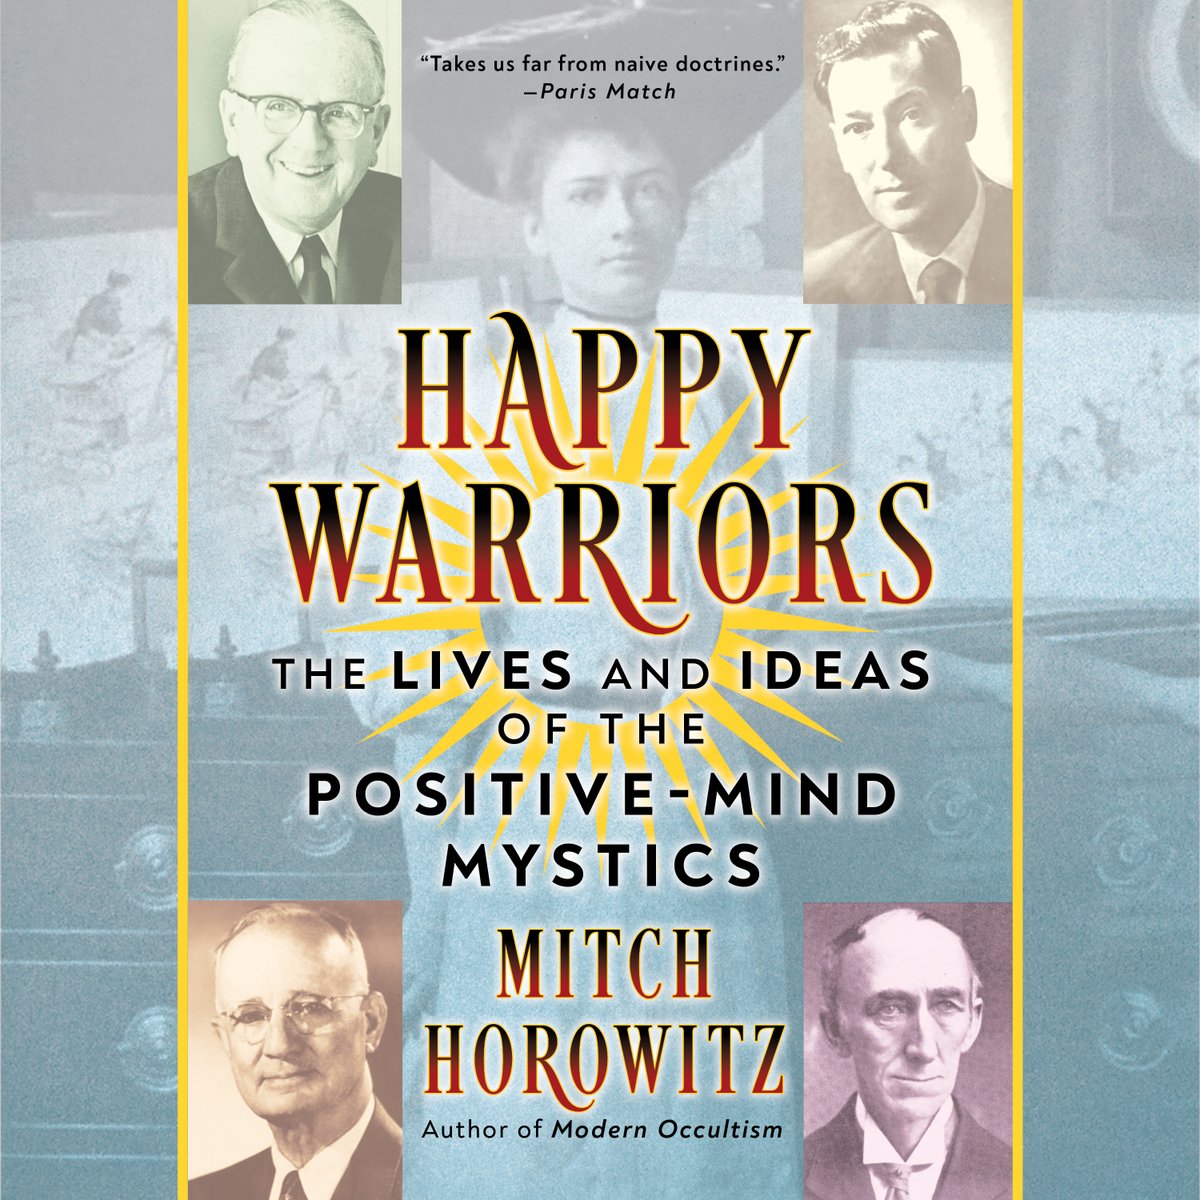 Friends, I've been very busy (a good problem) and I haven't done much to promote my latest book, Happy Warriors. It is very meaningful to me. In this book, I explore the lives and ideas of the second-generation of New Thoughters--the people who really made it a mass... 1/4